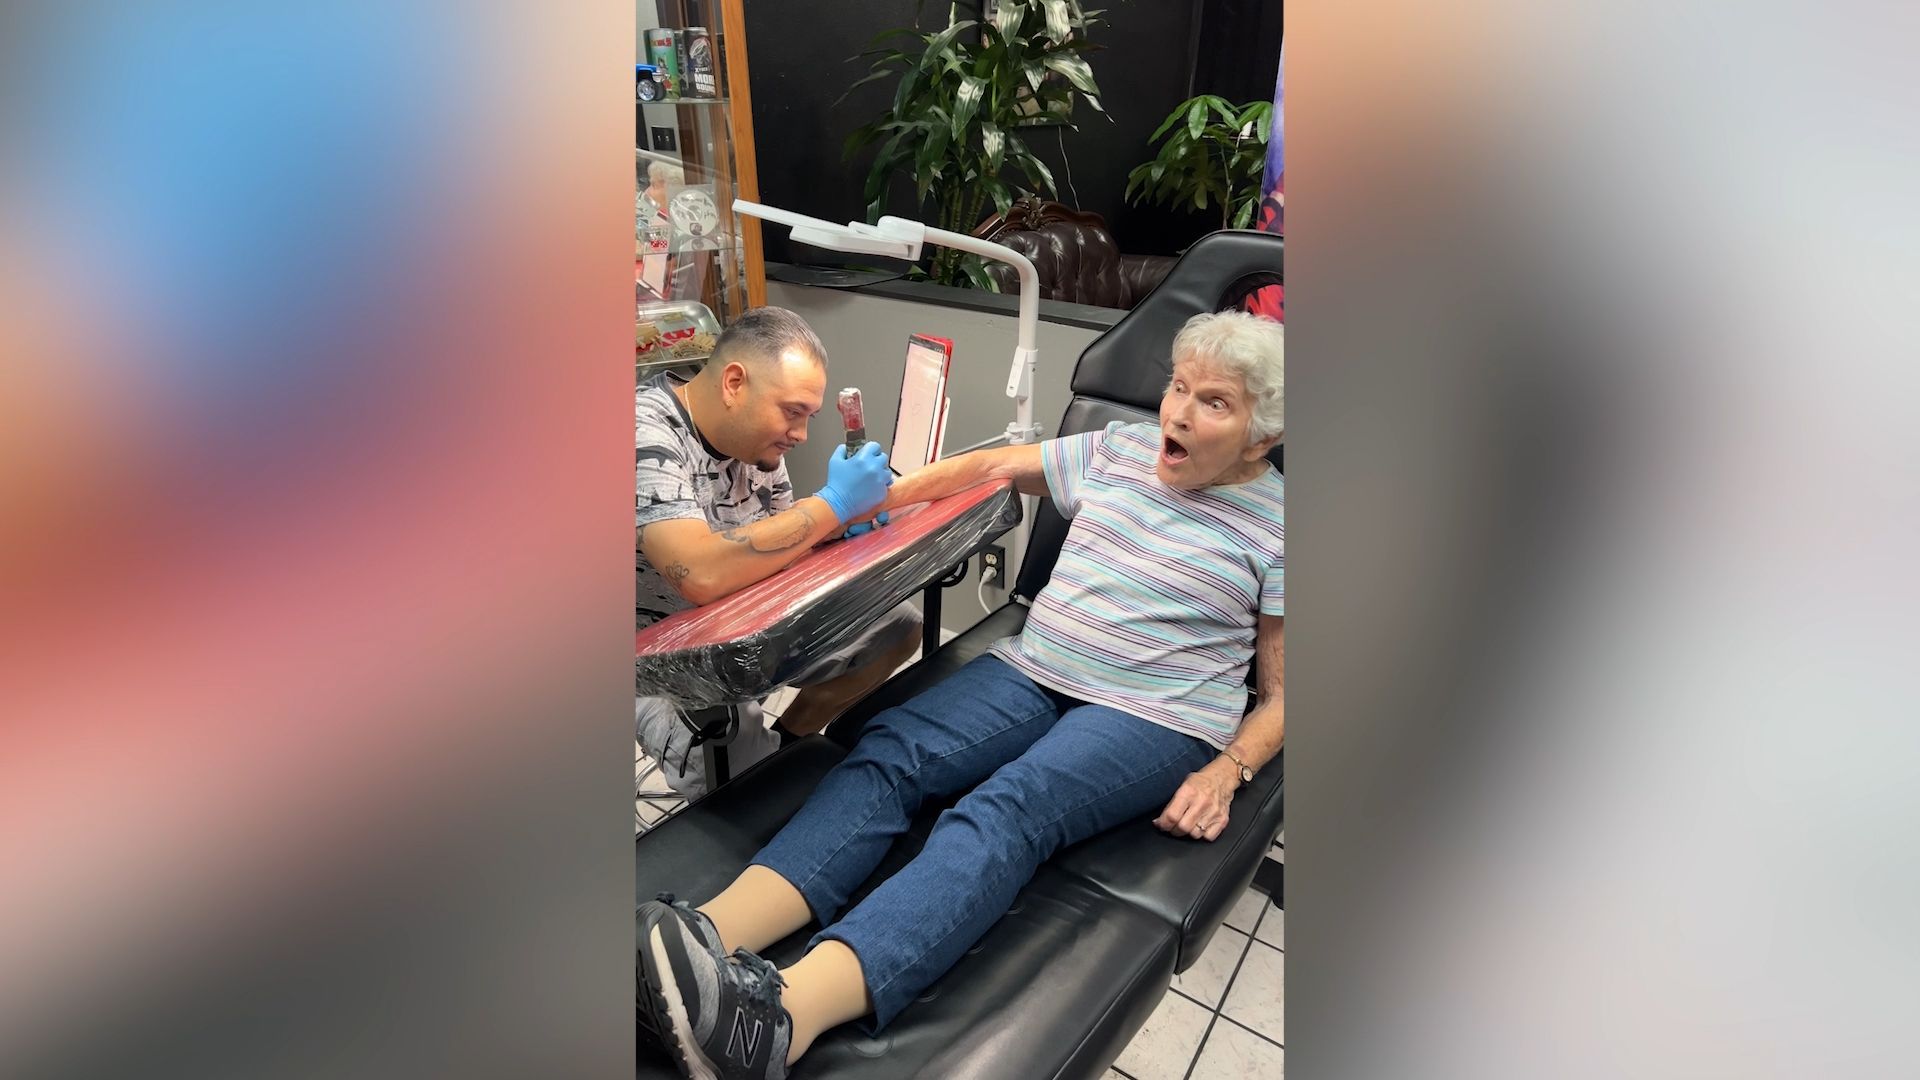 Rebellious granny persuades daughter and granddaughters to get a family tattoo